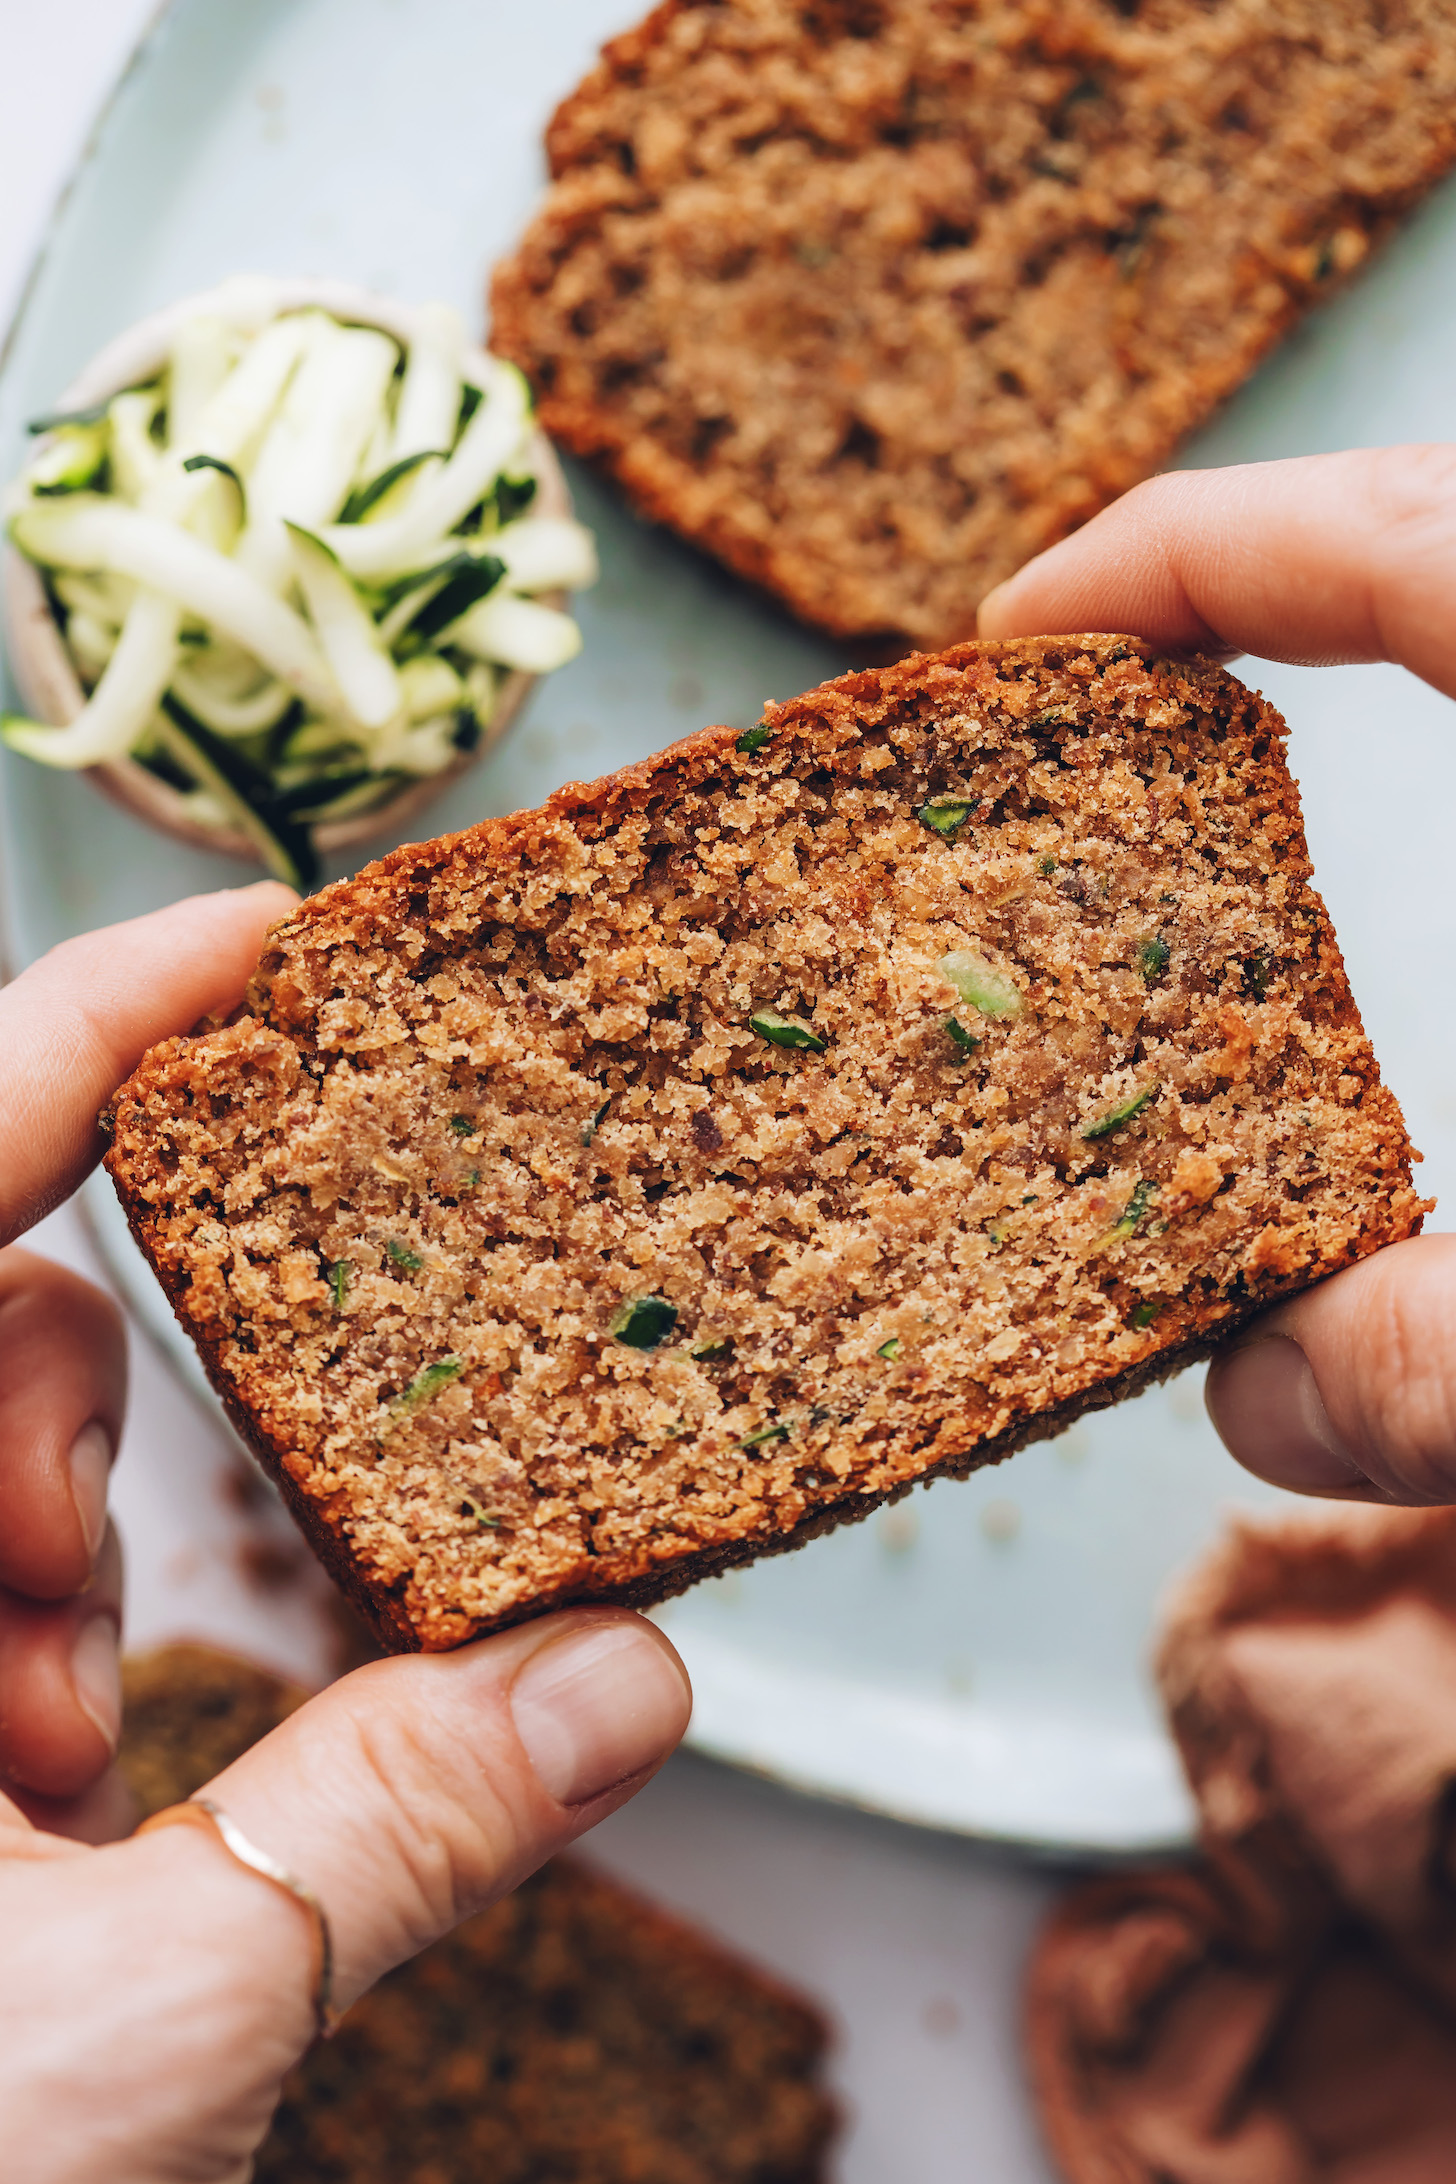 Holding up a slice of vegan gluten-free zucchini bread to show the texture